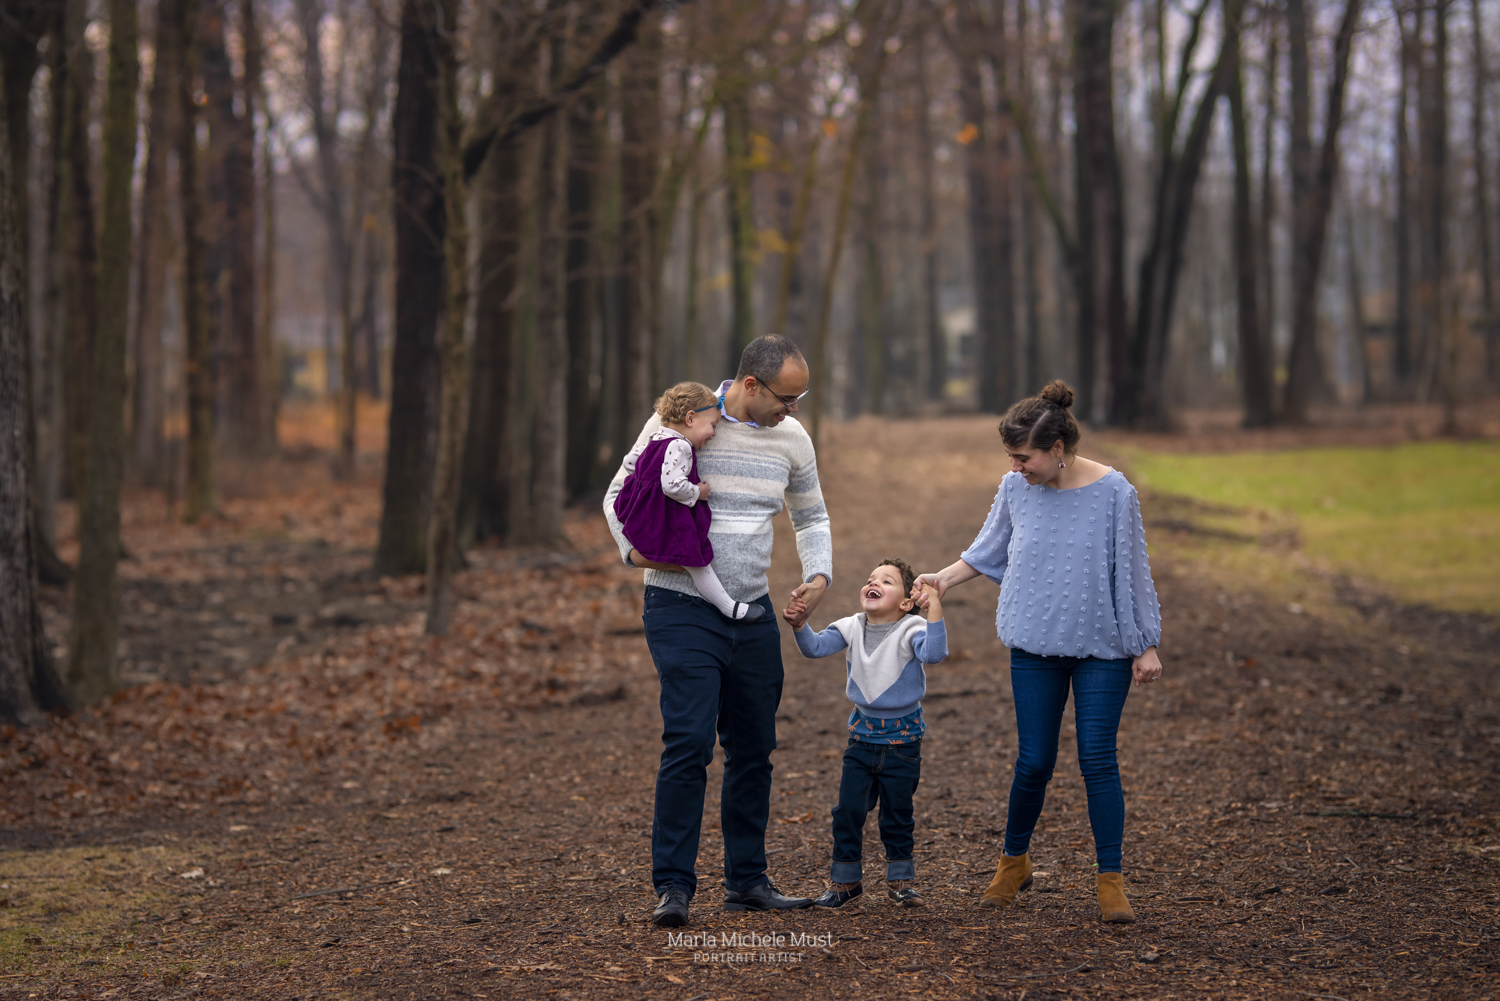 A family of four walk among autumn leaves in the forest as part of a fall family photoshoot near Detroit.